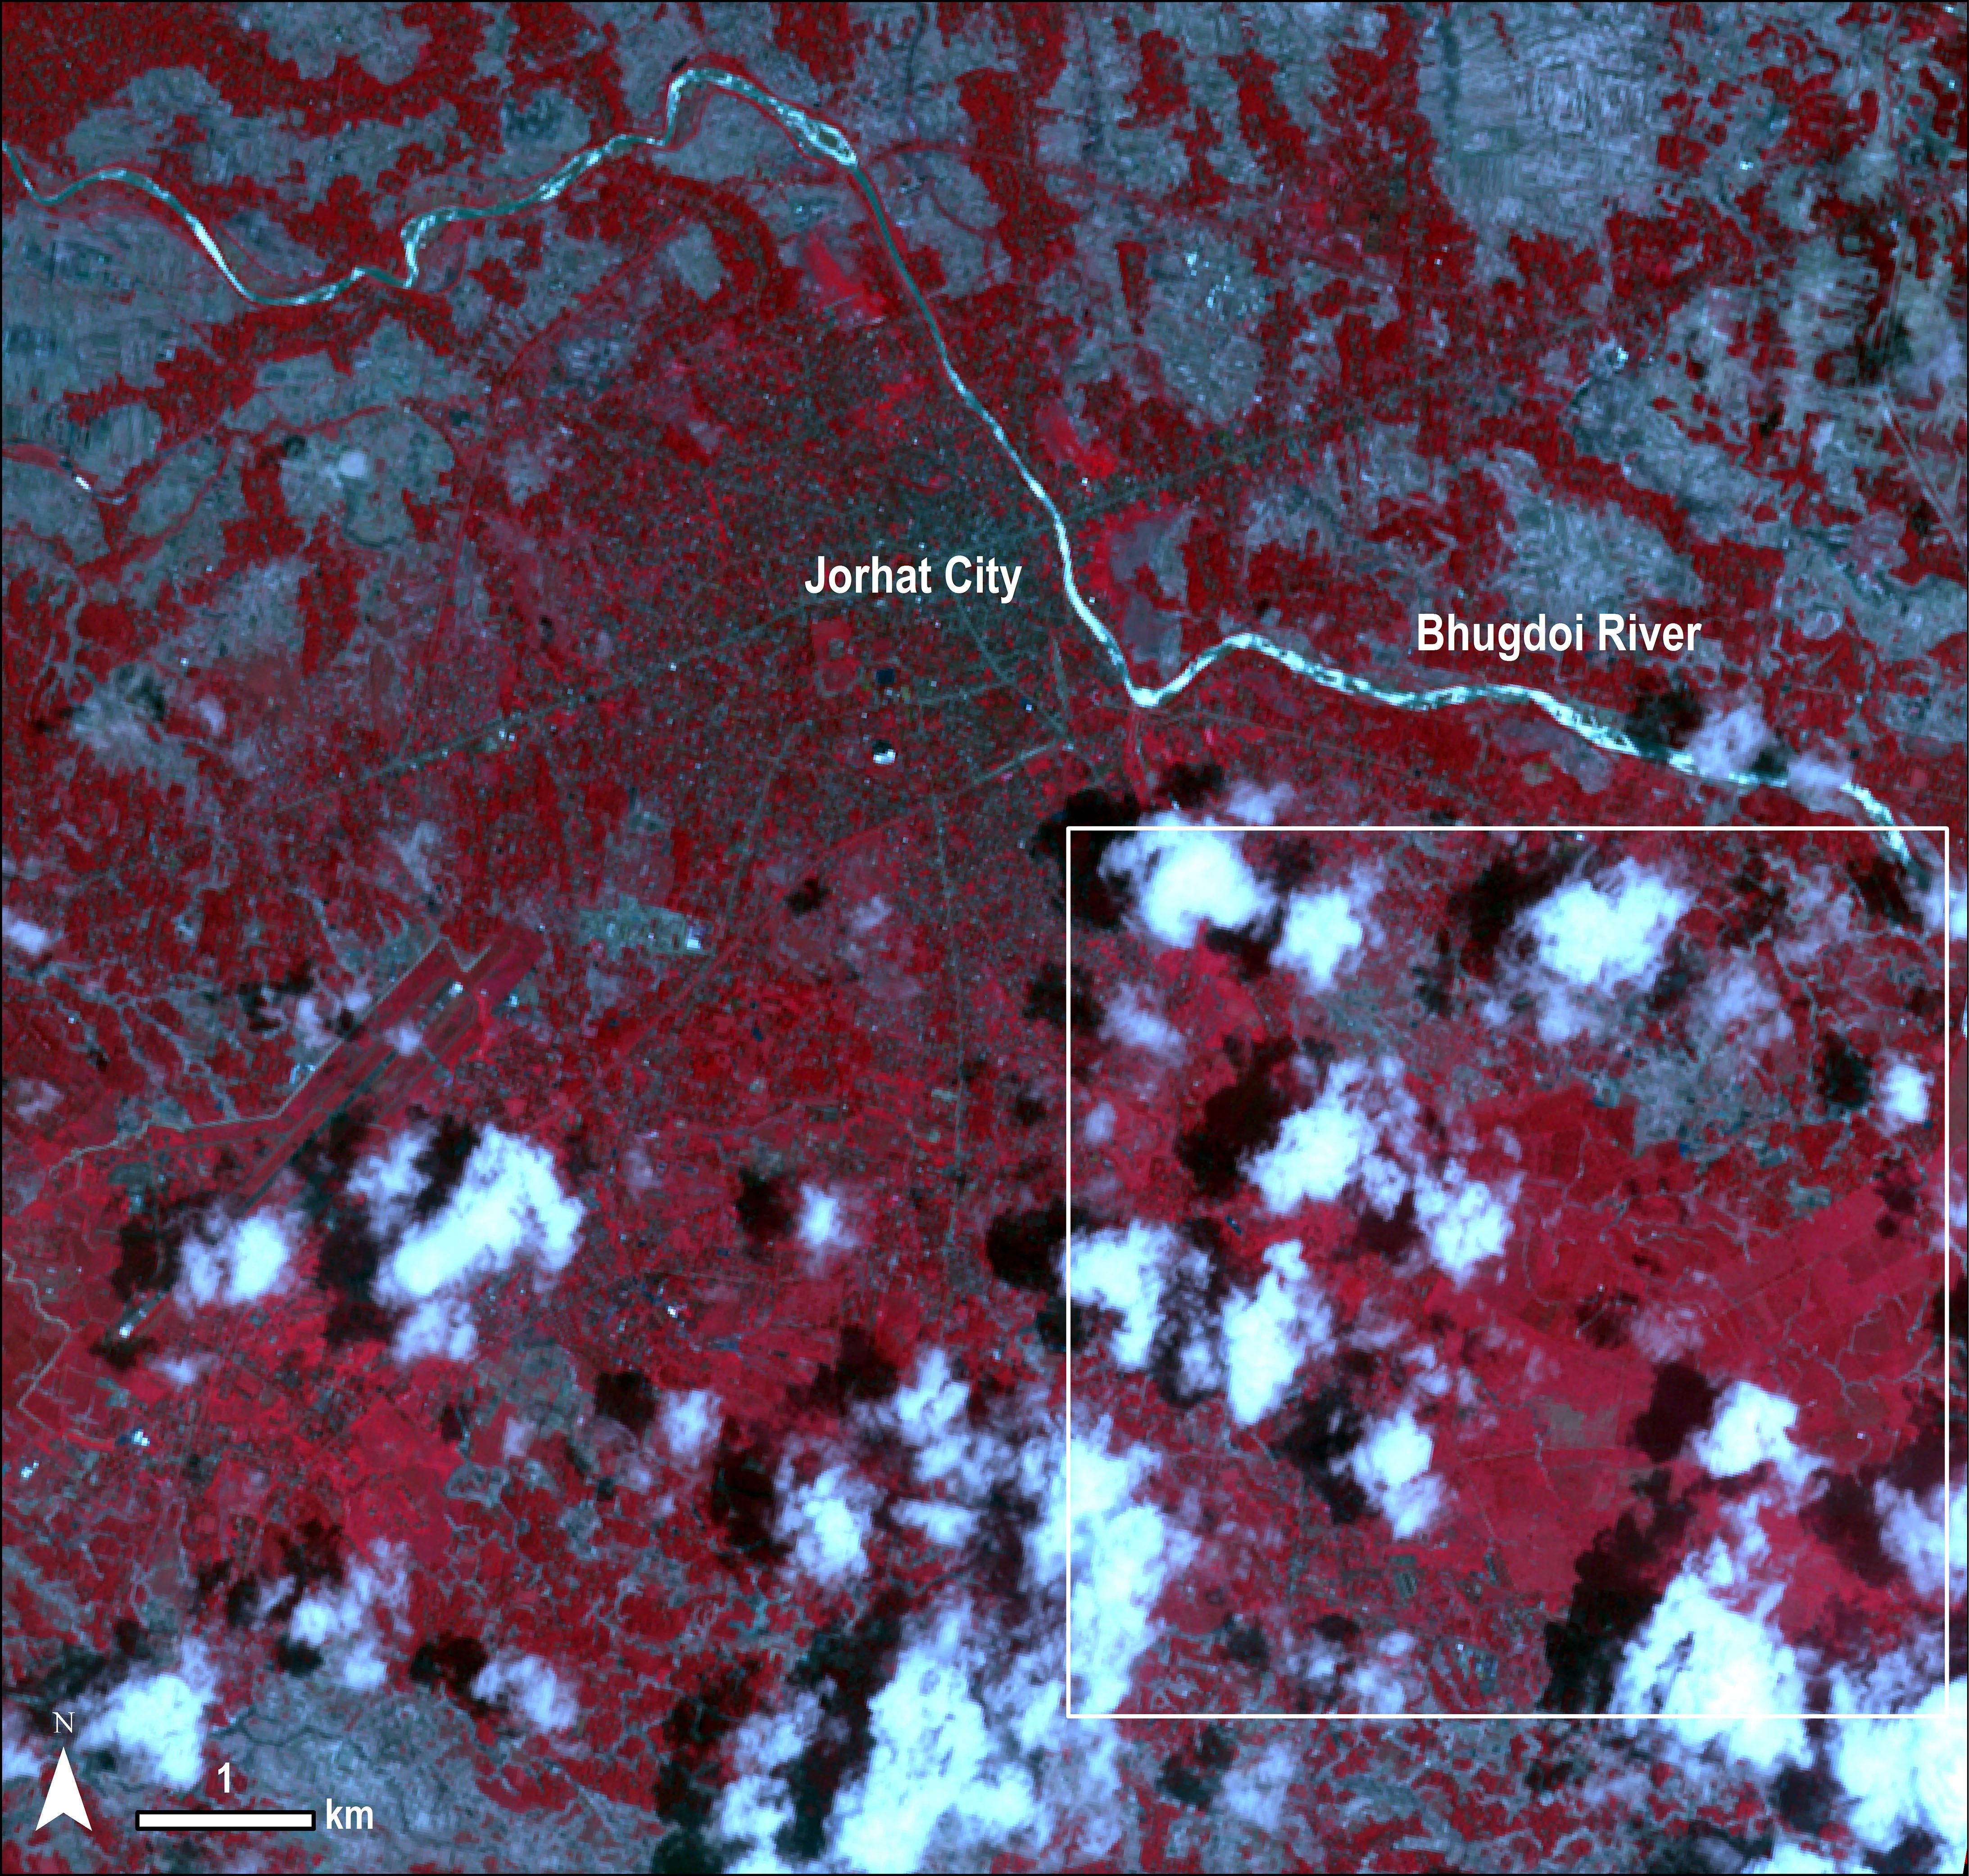 ASTER image of Jorhat City, Assam, India acquired on May 7, 2010.